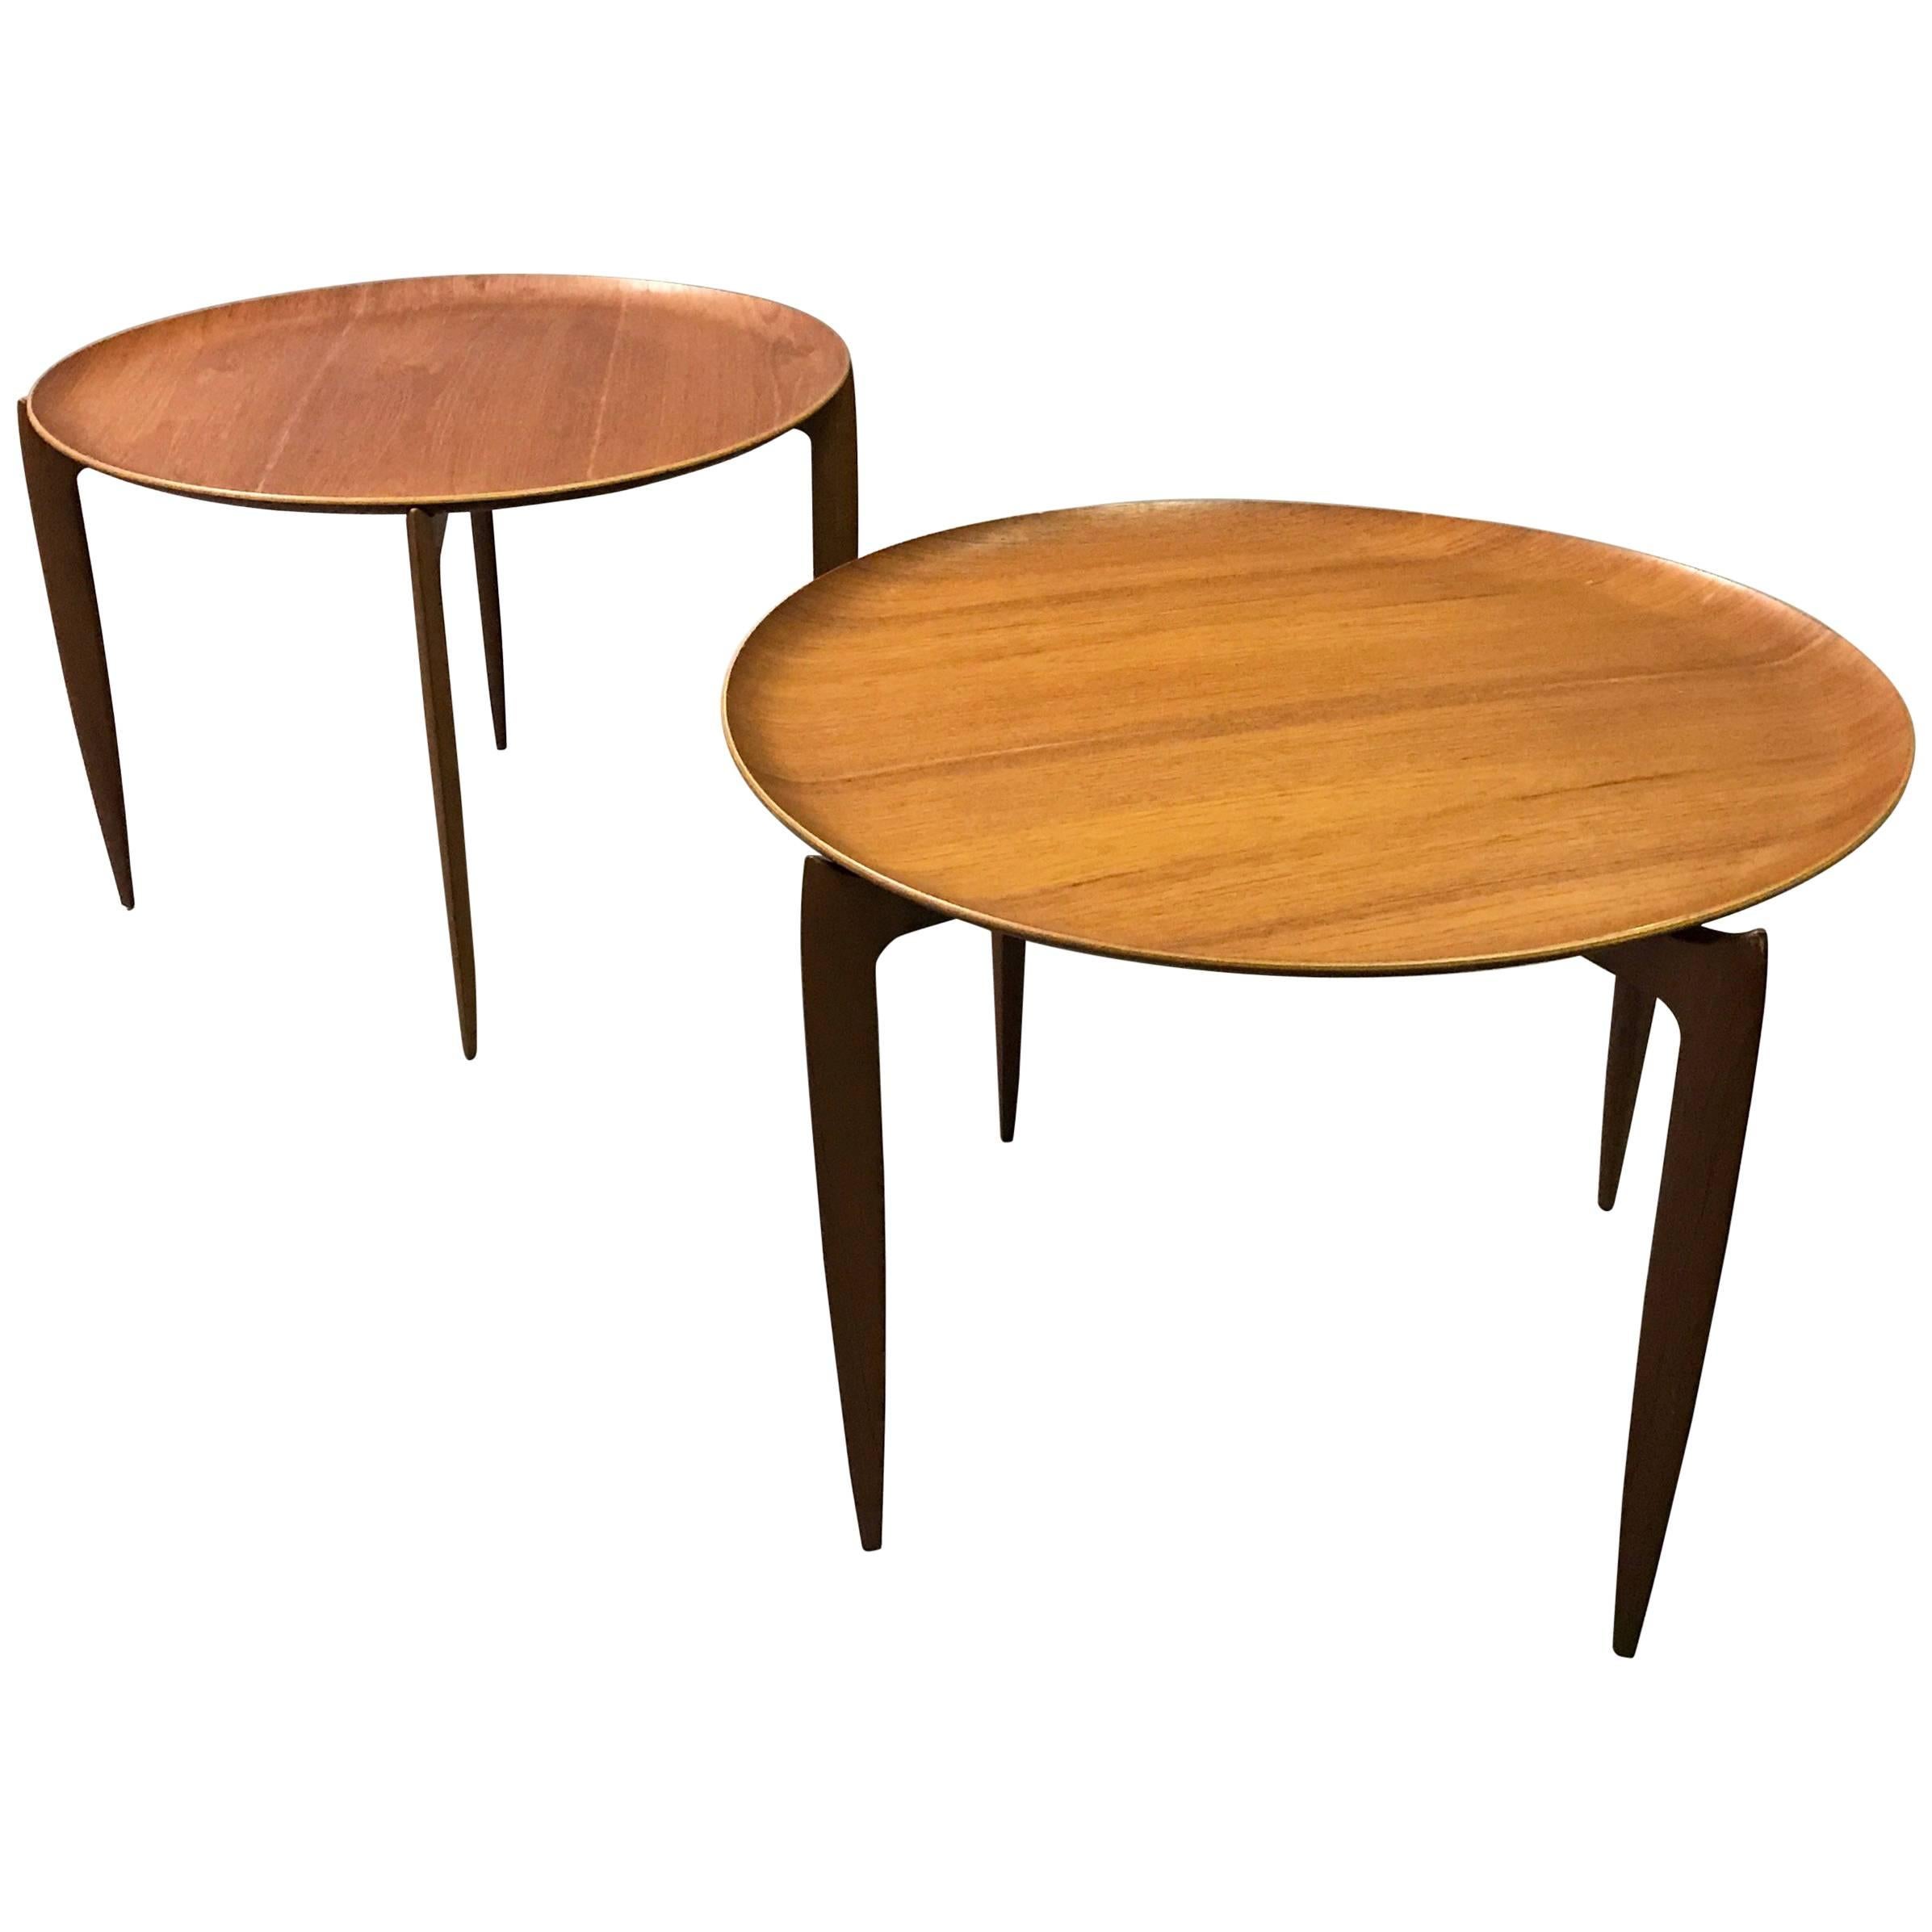 Danish Modern Teak Folding Tray Tables by Willumsen and Engholm for Fritz Hansen